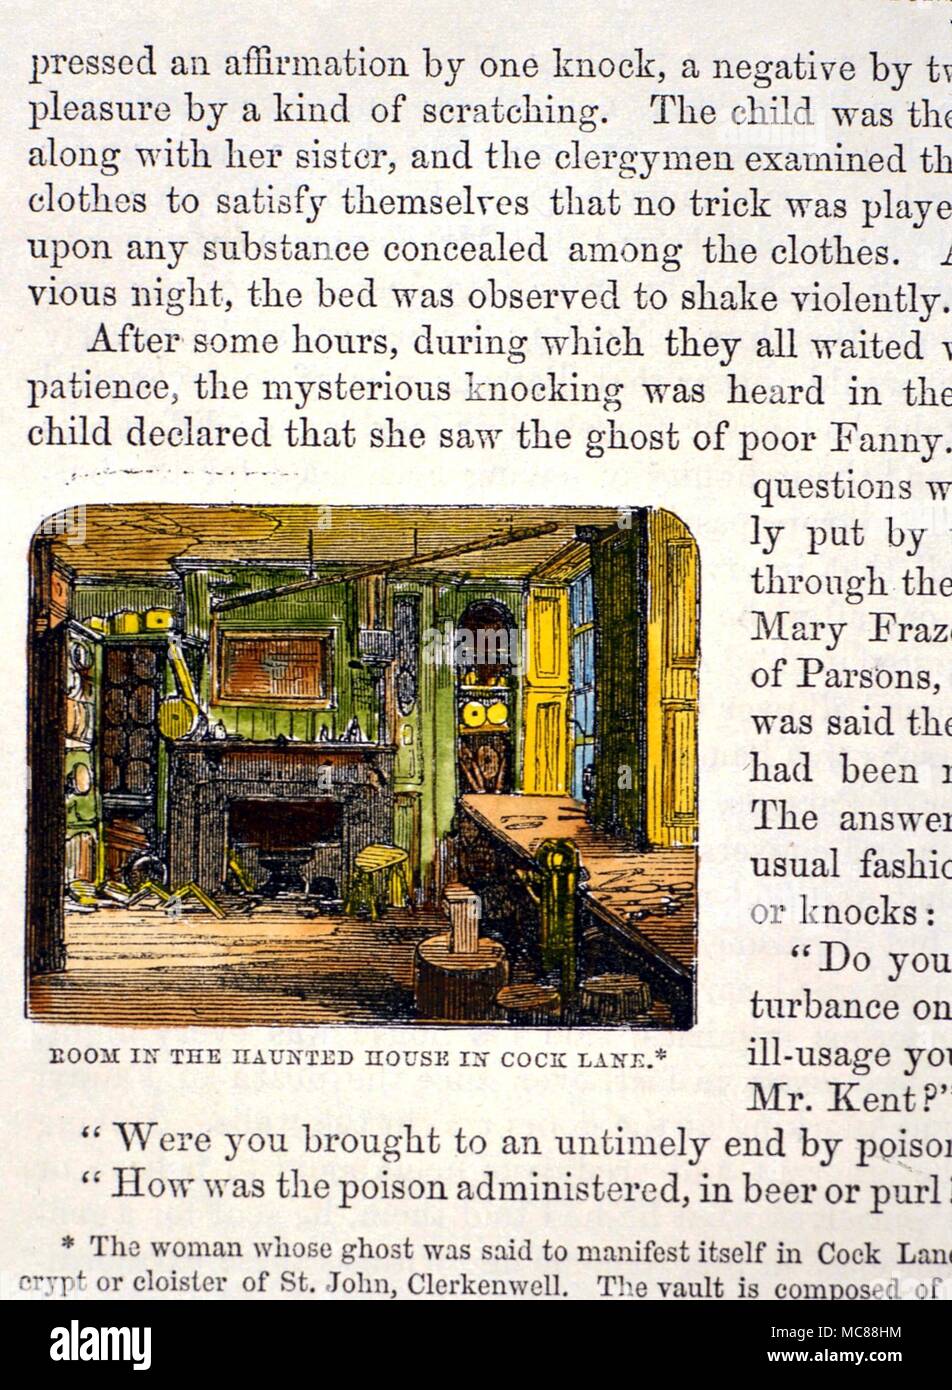 The interior of the huanted room in the 'Scratching Fanny' (combined poltergeist and haunting phenomena) case of 1760 onwards. From Chas. Mackay's 'Memoires of Extraordinary Popular Delusions...' Stock Photo